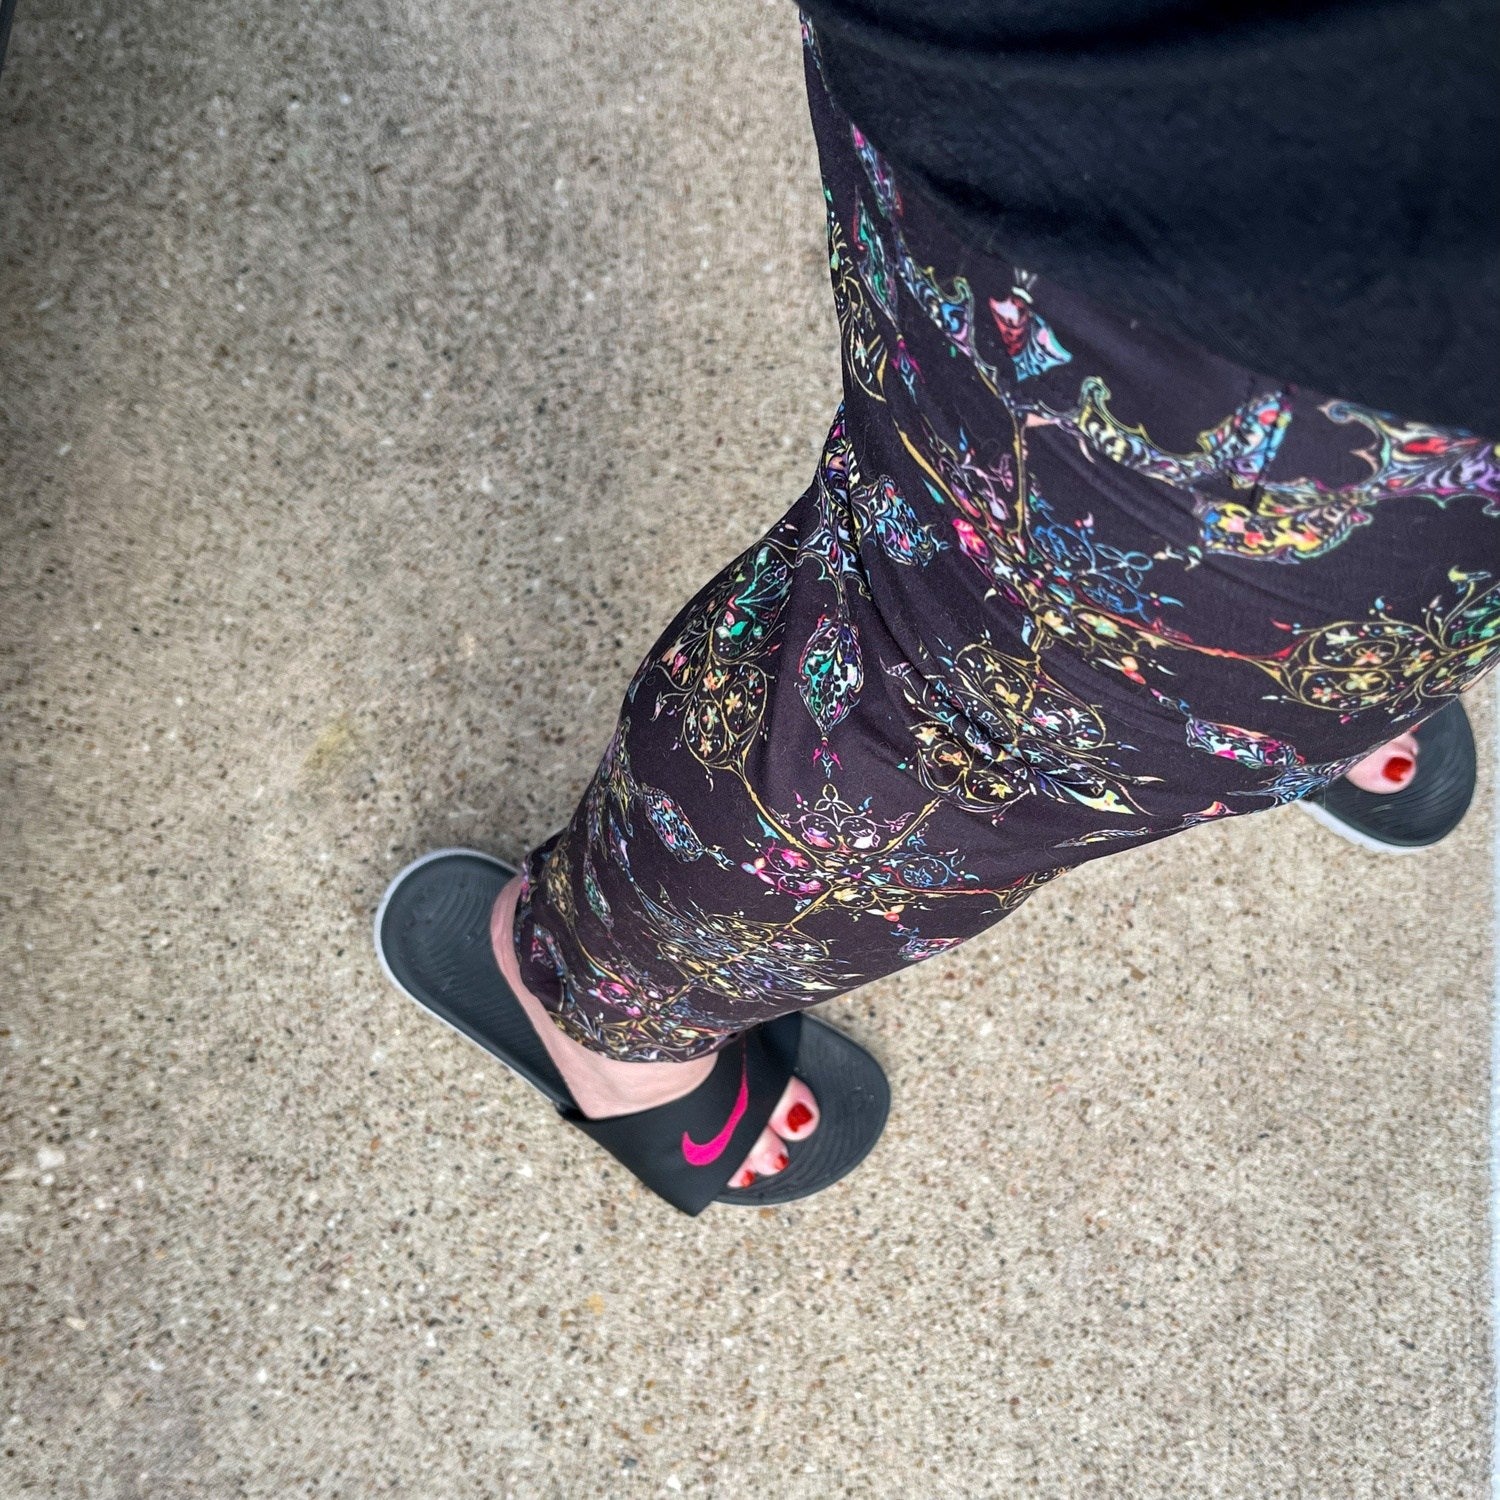 Bejeweled Full Length Leggings with Pockets